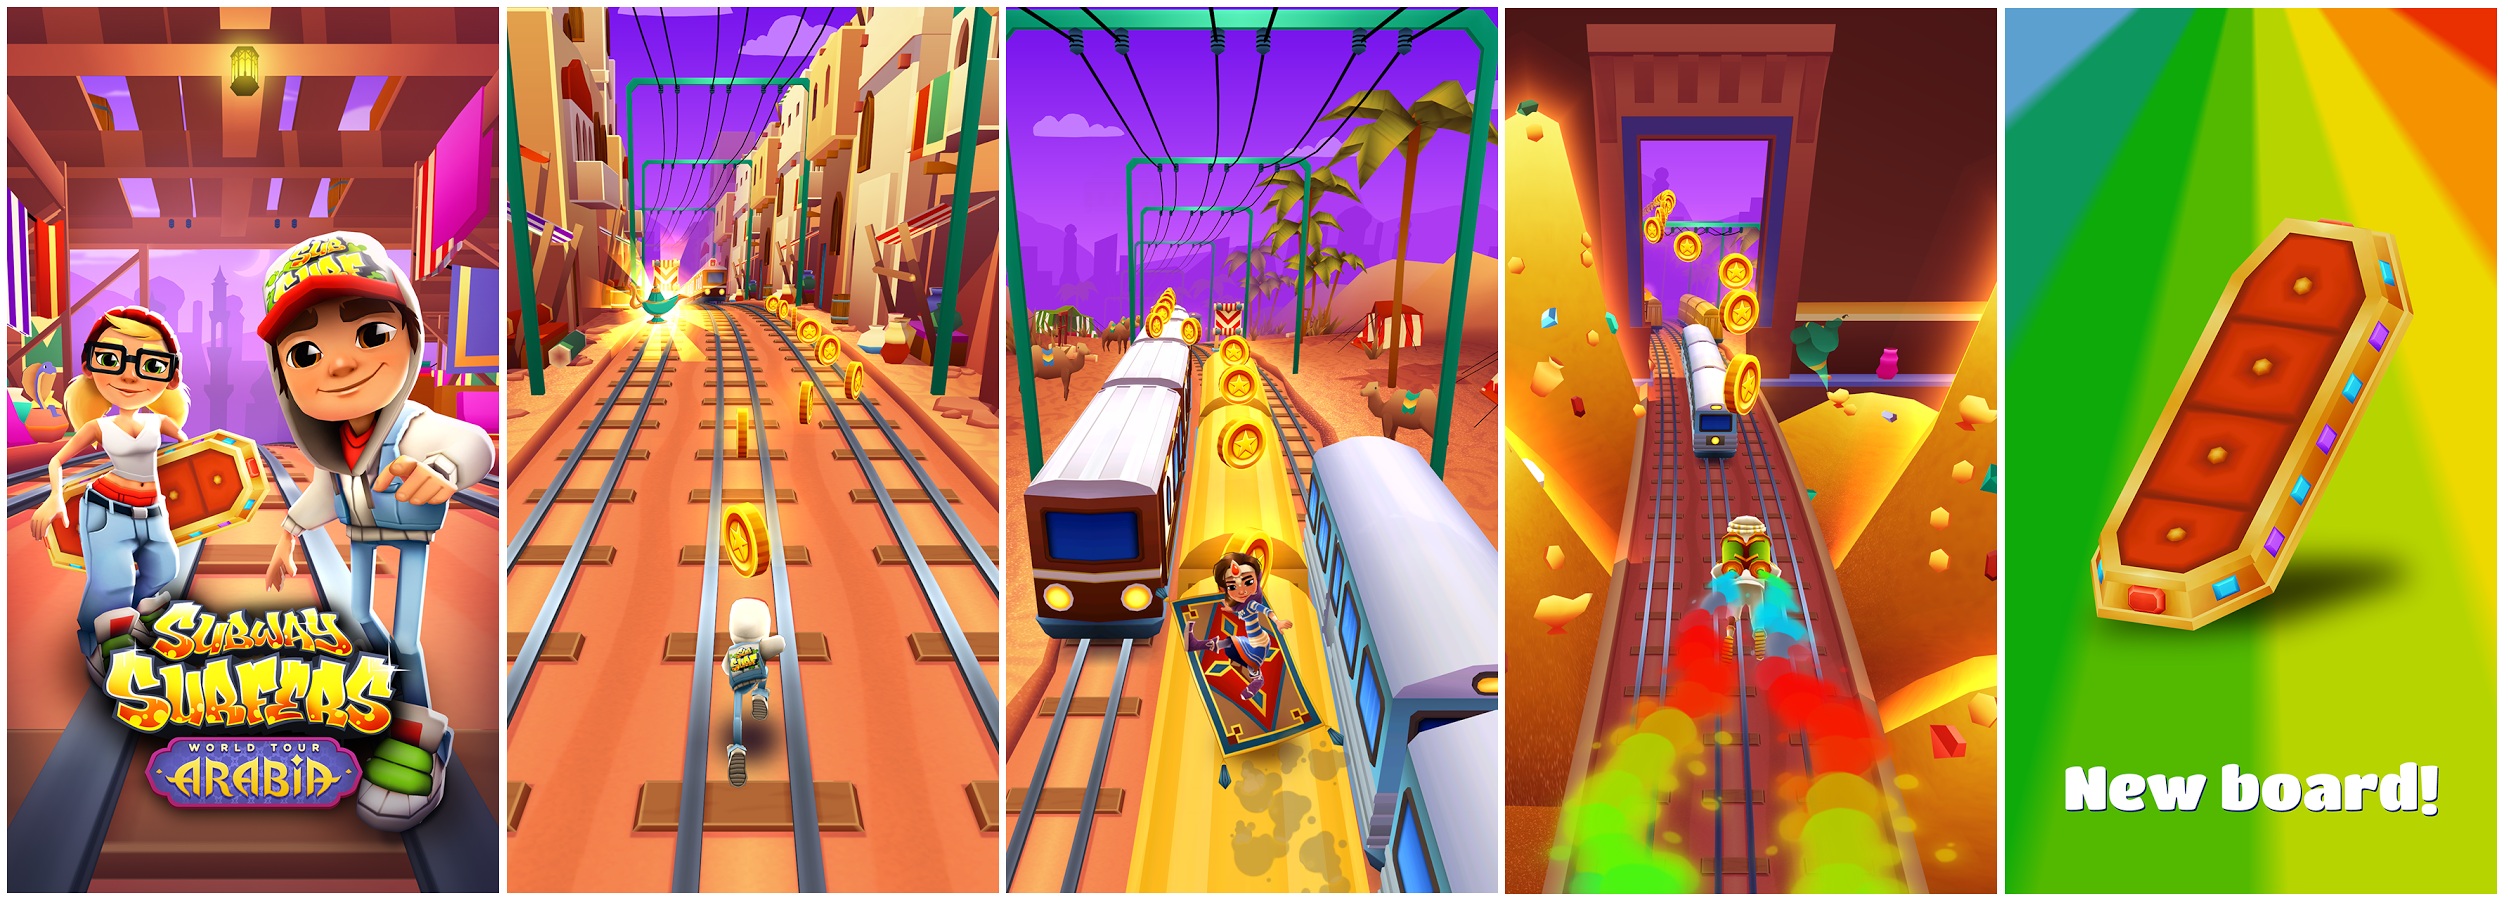 Download Subway Surfers Beijing Unlimited Coins And Keys For Android